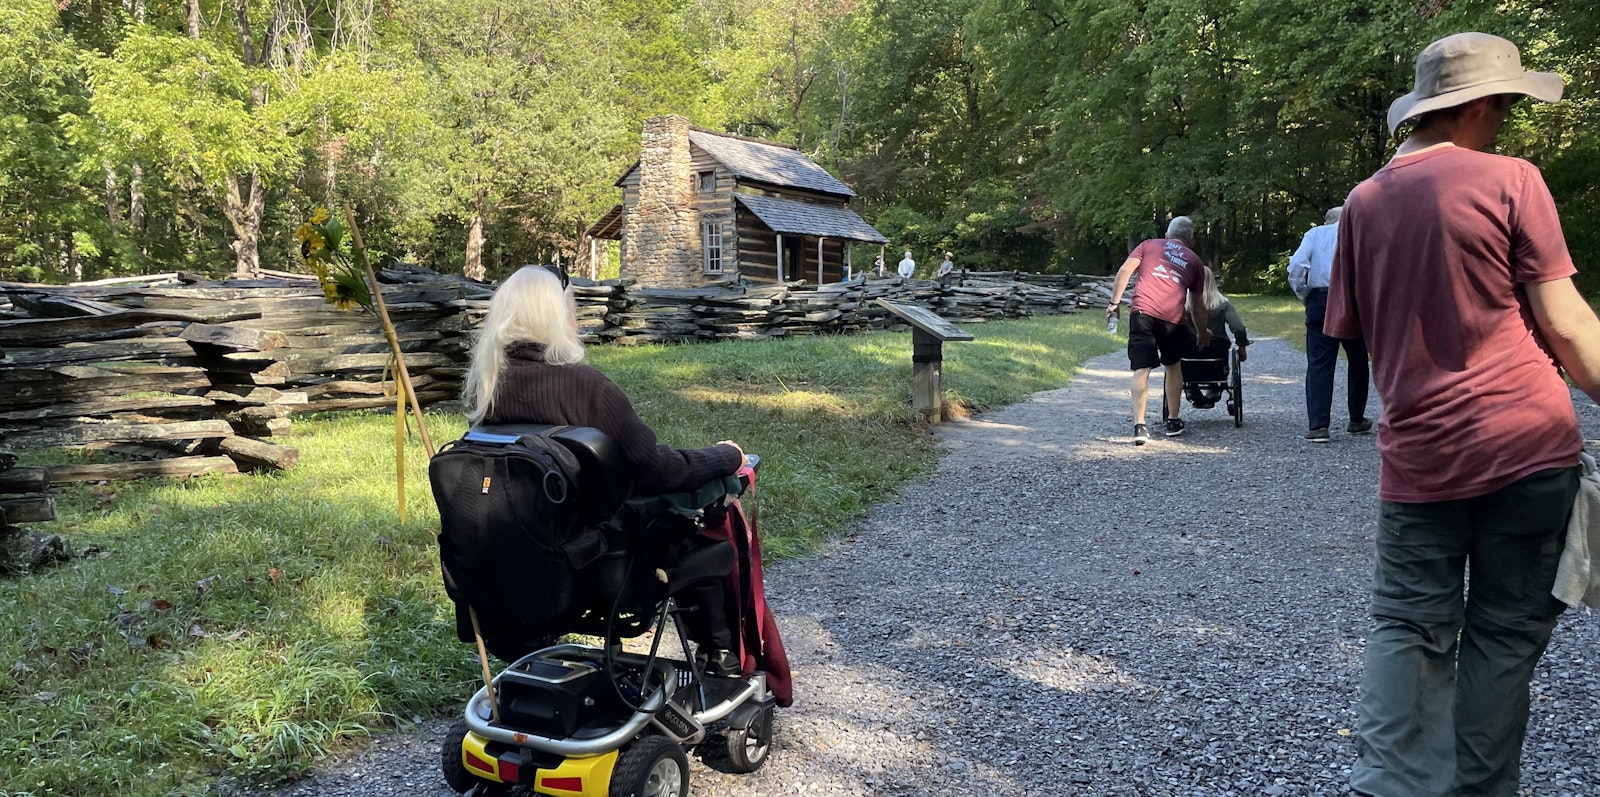 Visitors using motorized chairs navigate a paved trail through a wood